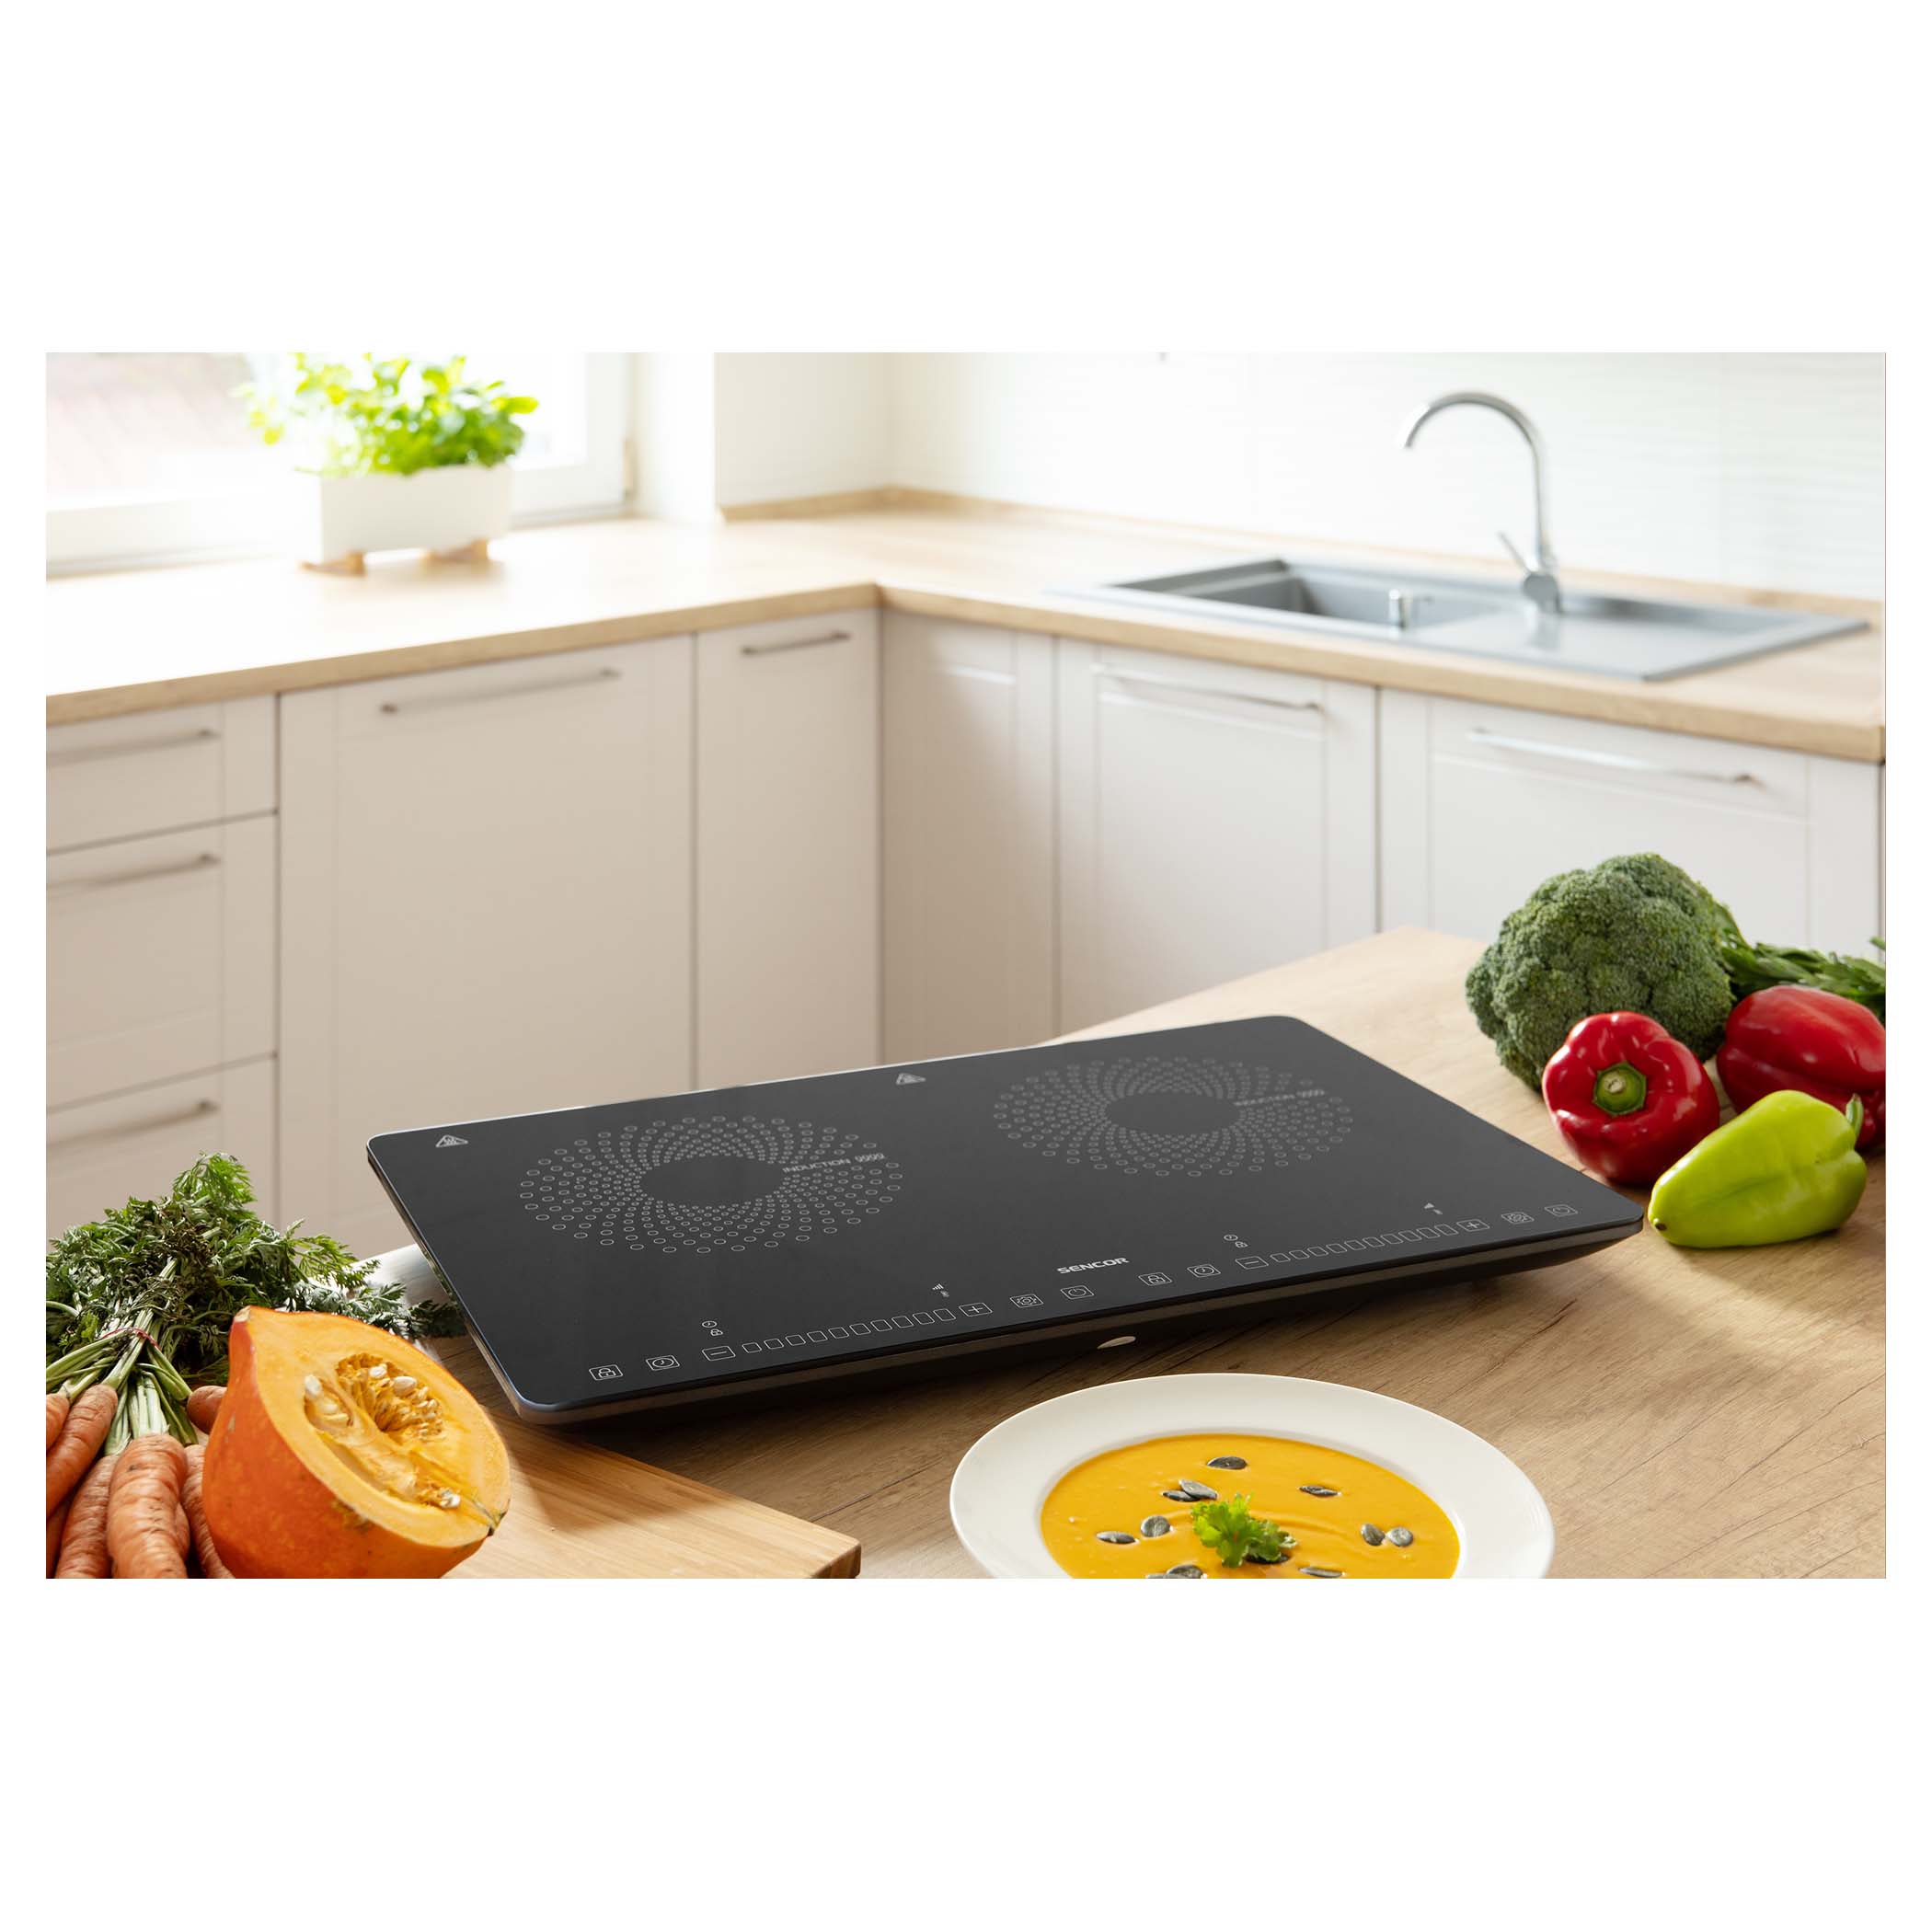 Double induction cooktop, SCP 4501BK